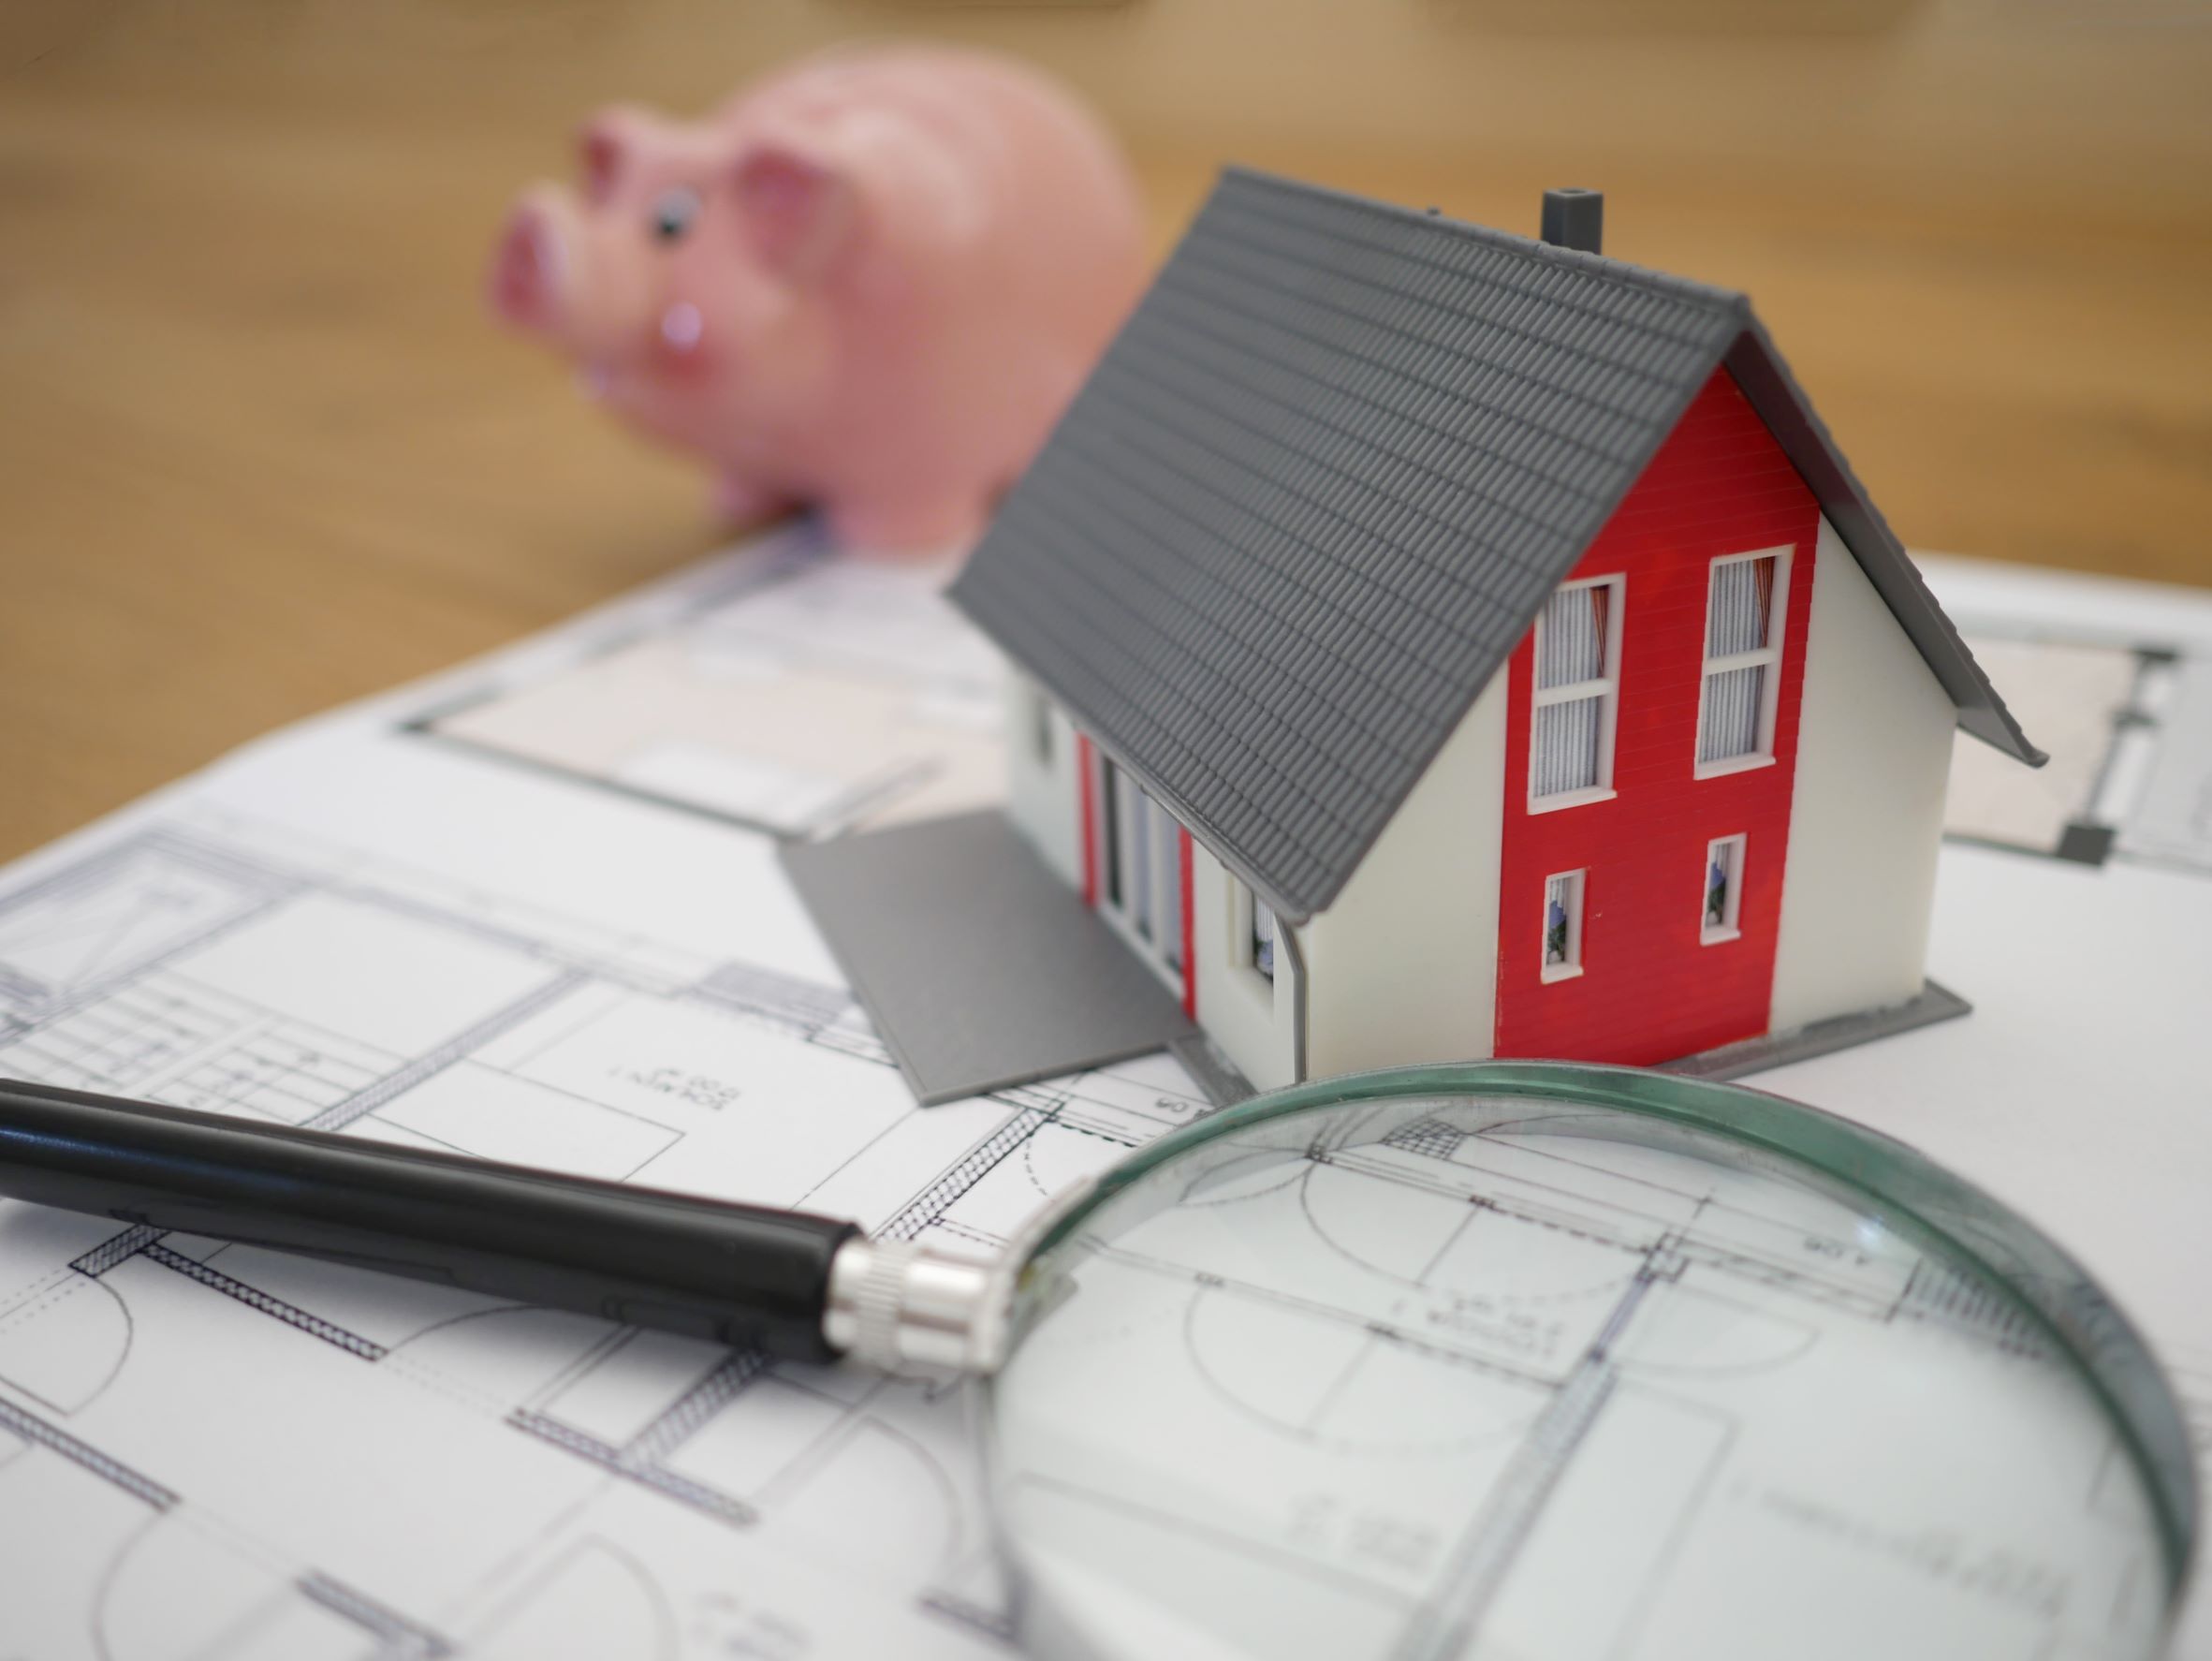 Image of a house, magnifying glass, floor plans, and coin bank. Photo by Tierra Mallorca on Unsplash